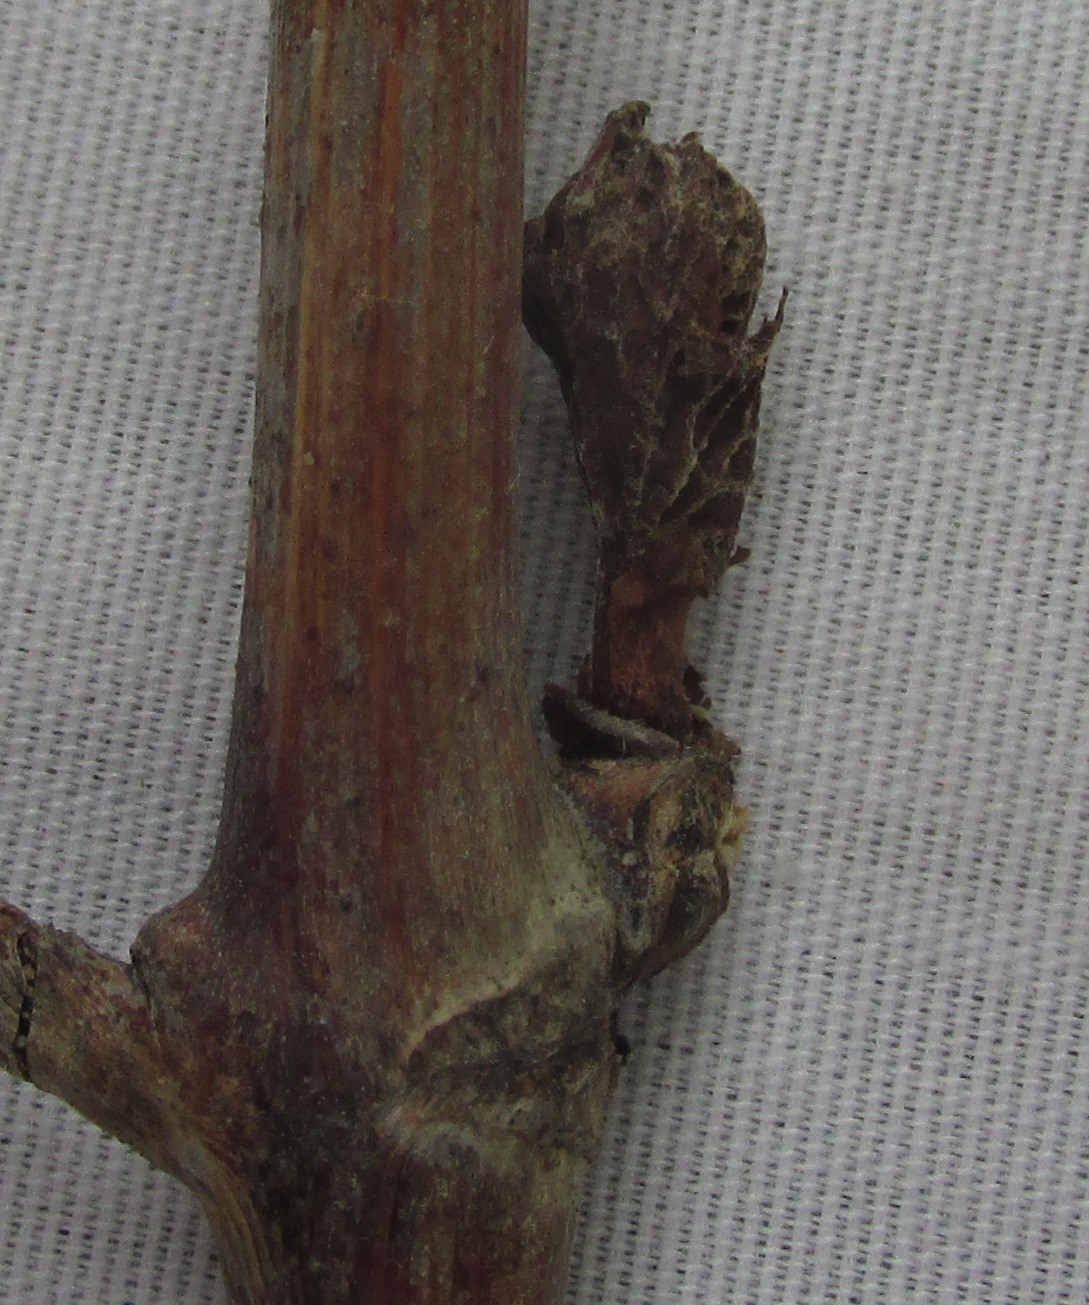 Close-up of a brown, shriveled bud sprouting offf a Norton cane.